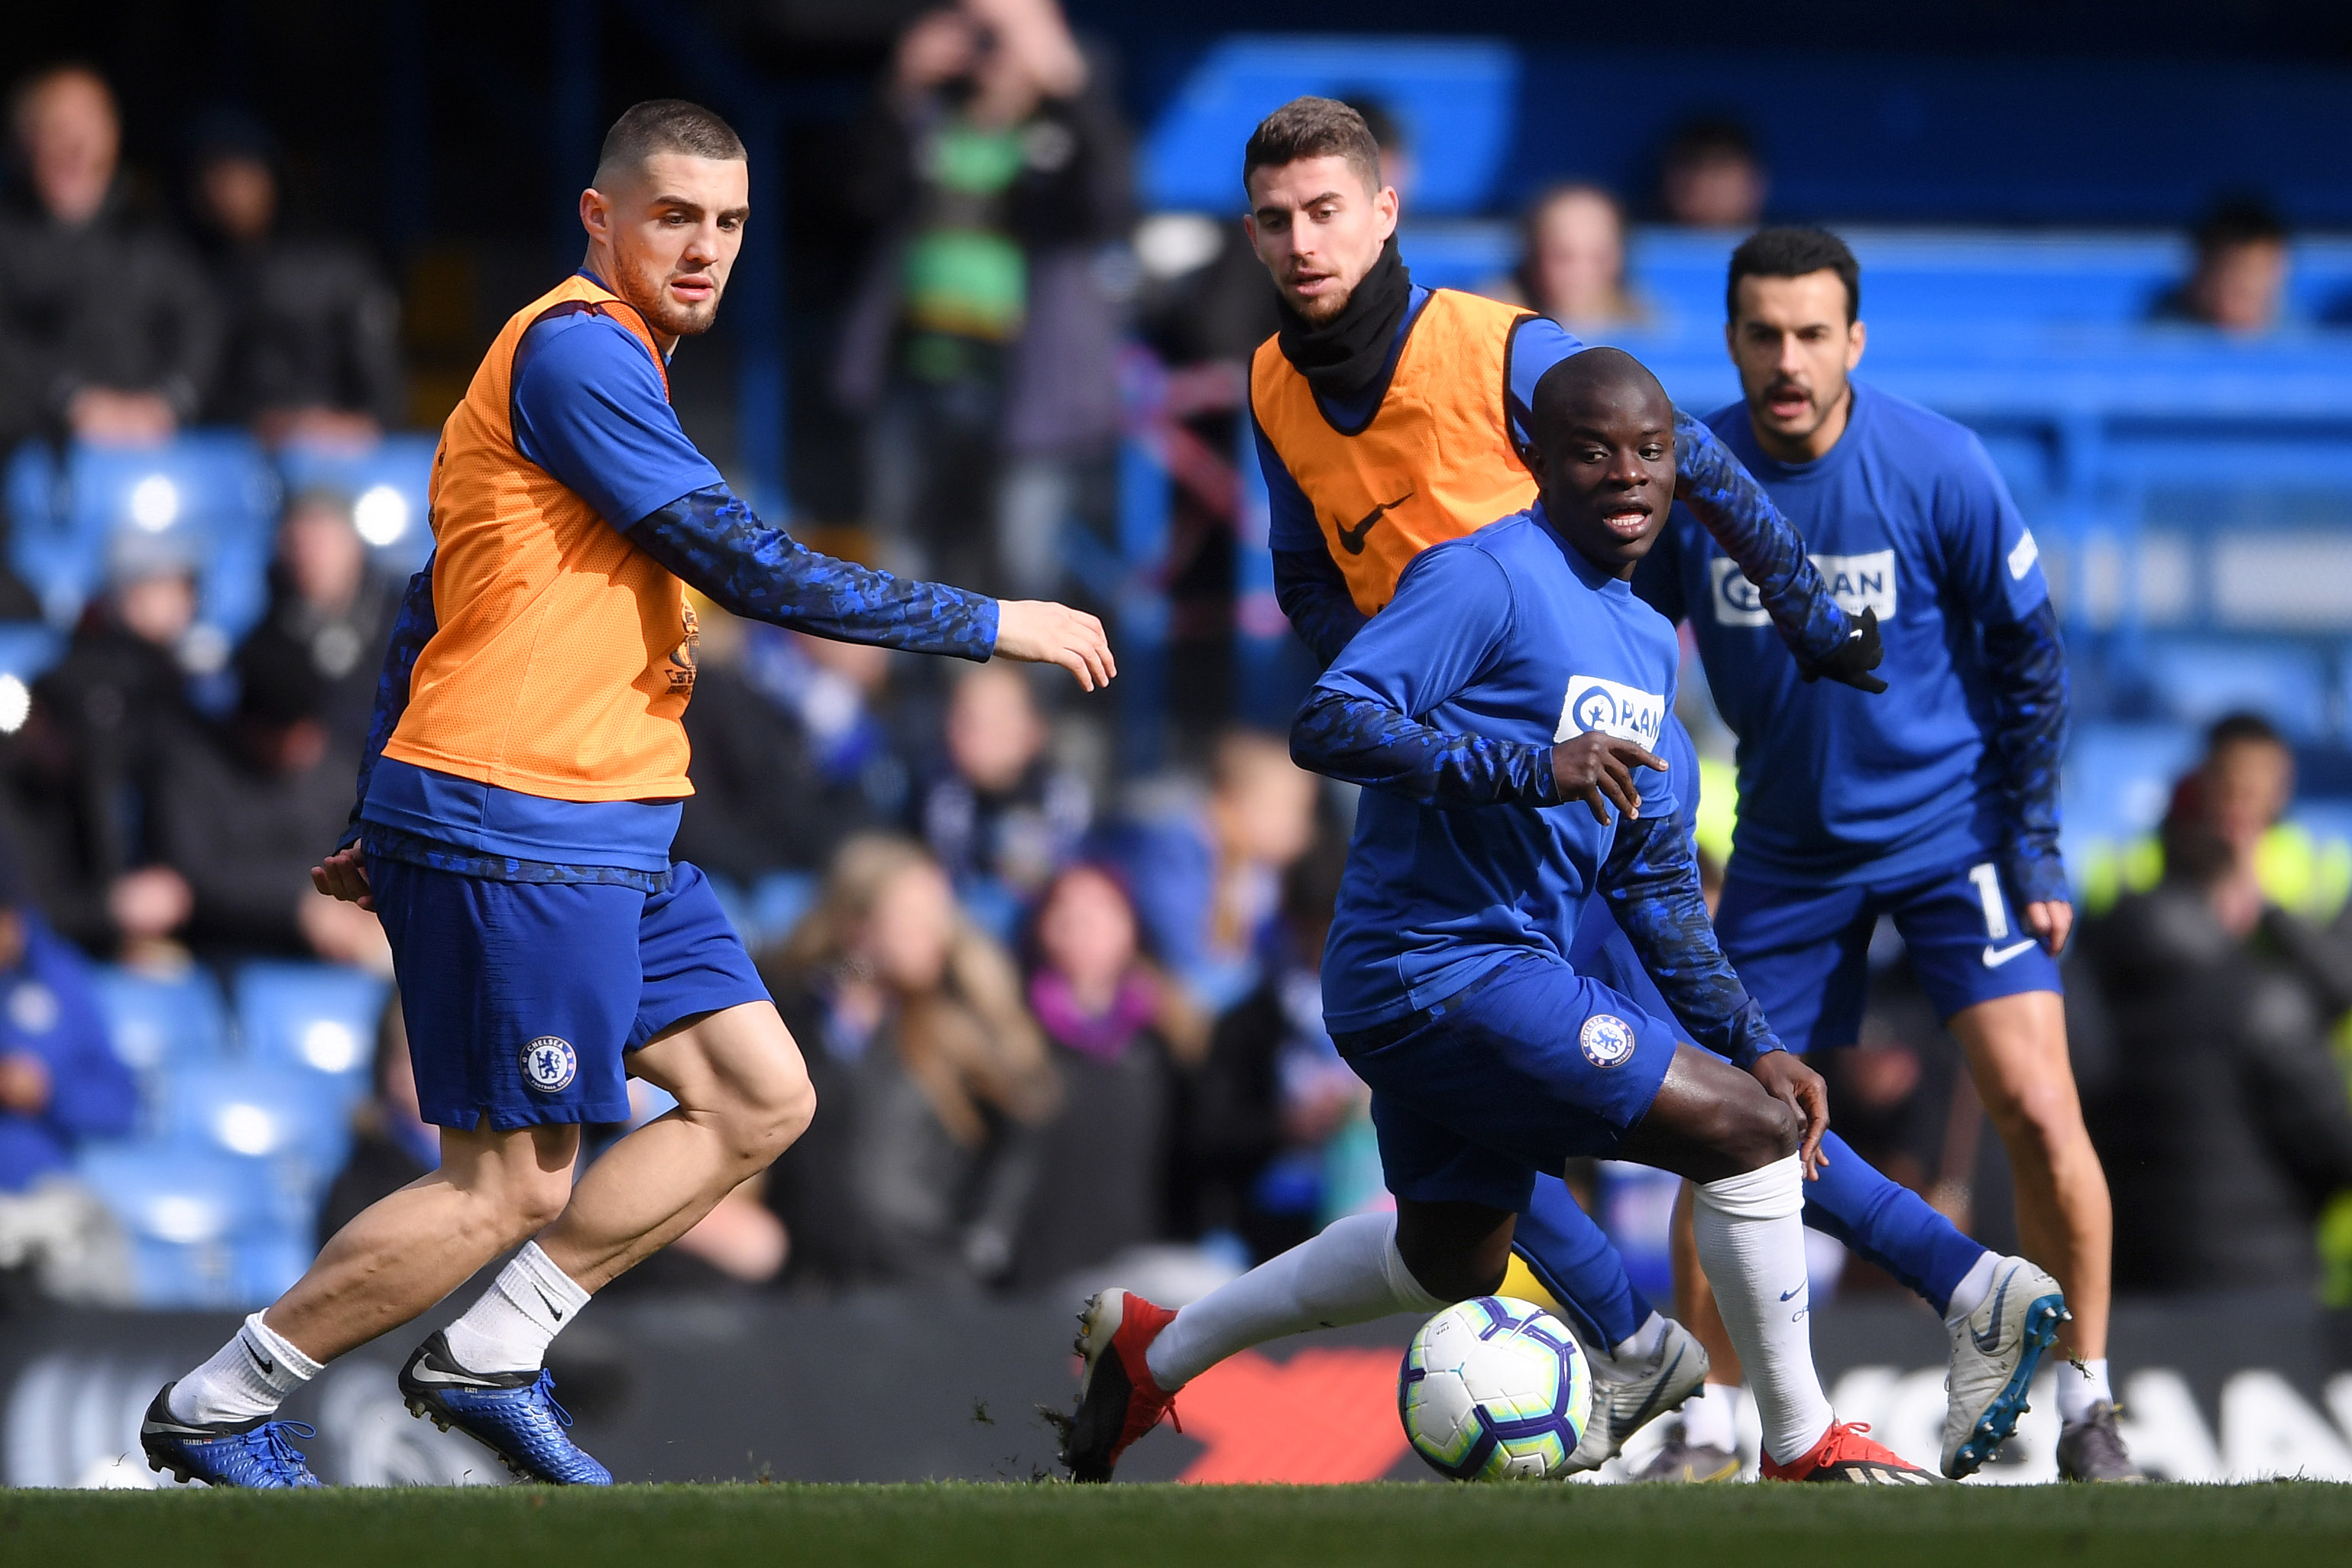 LONDON, ENGLAND - MARCH 10: N'golo Kante, Mateo Kovacic, Jorginho and Pedro of Chelsea warm up prior to the Premier League match between Chelsea FC and Wolverhampton Wanderers at Stamford Bridge on March 10, 2019 in London, United Kingdom. (Photo by Laurence Griffiths/Getty Images)